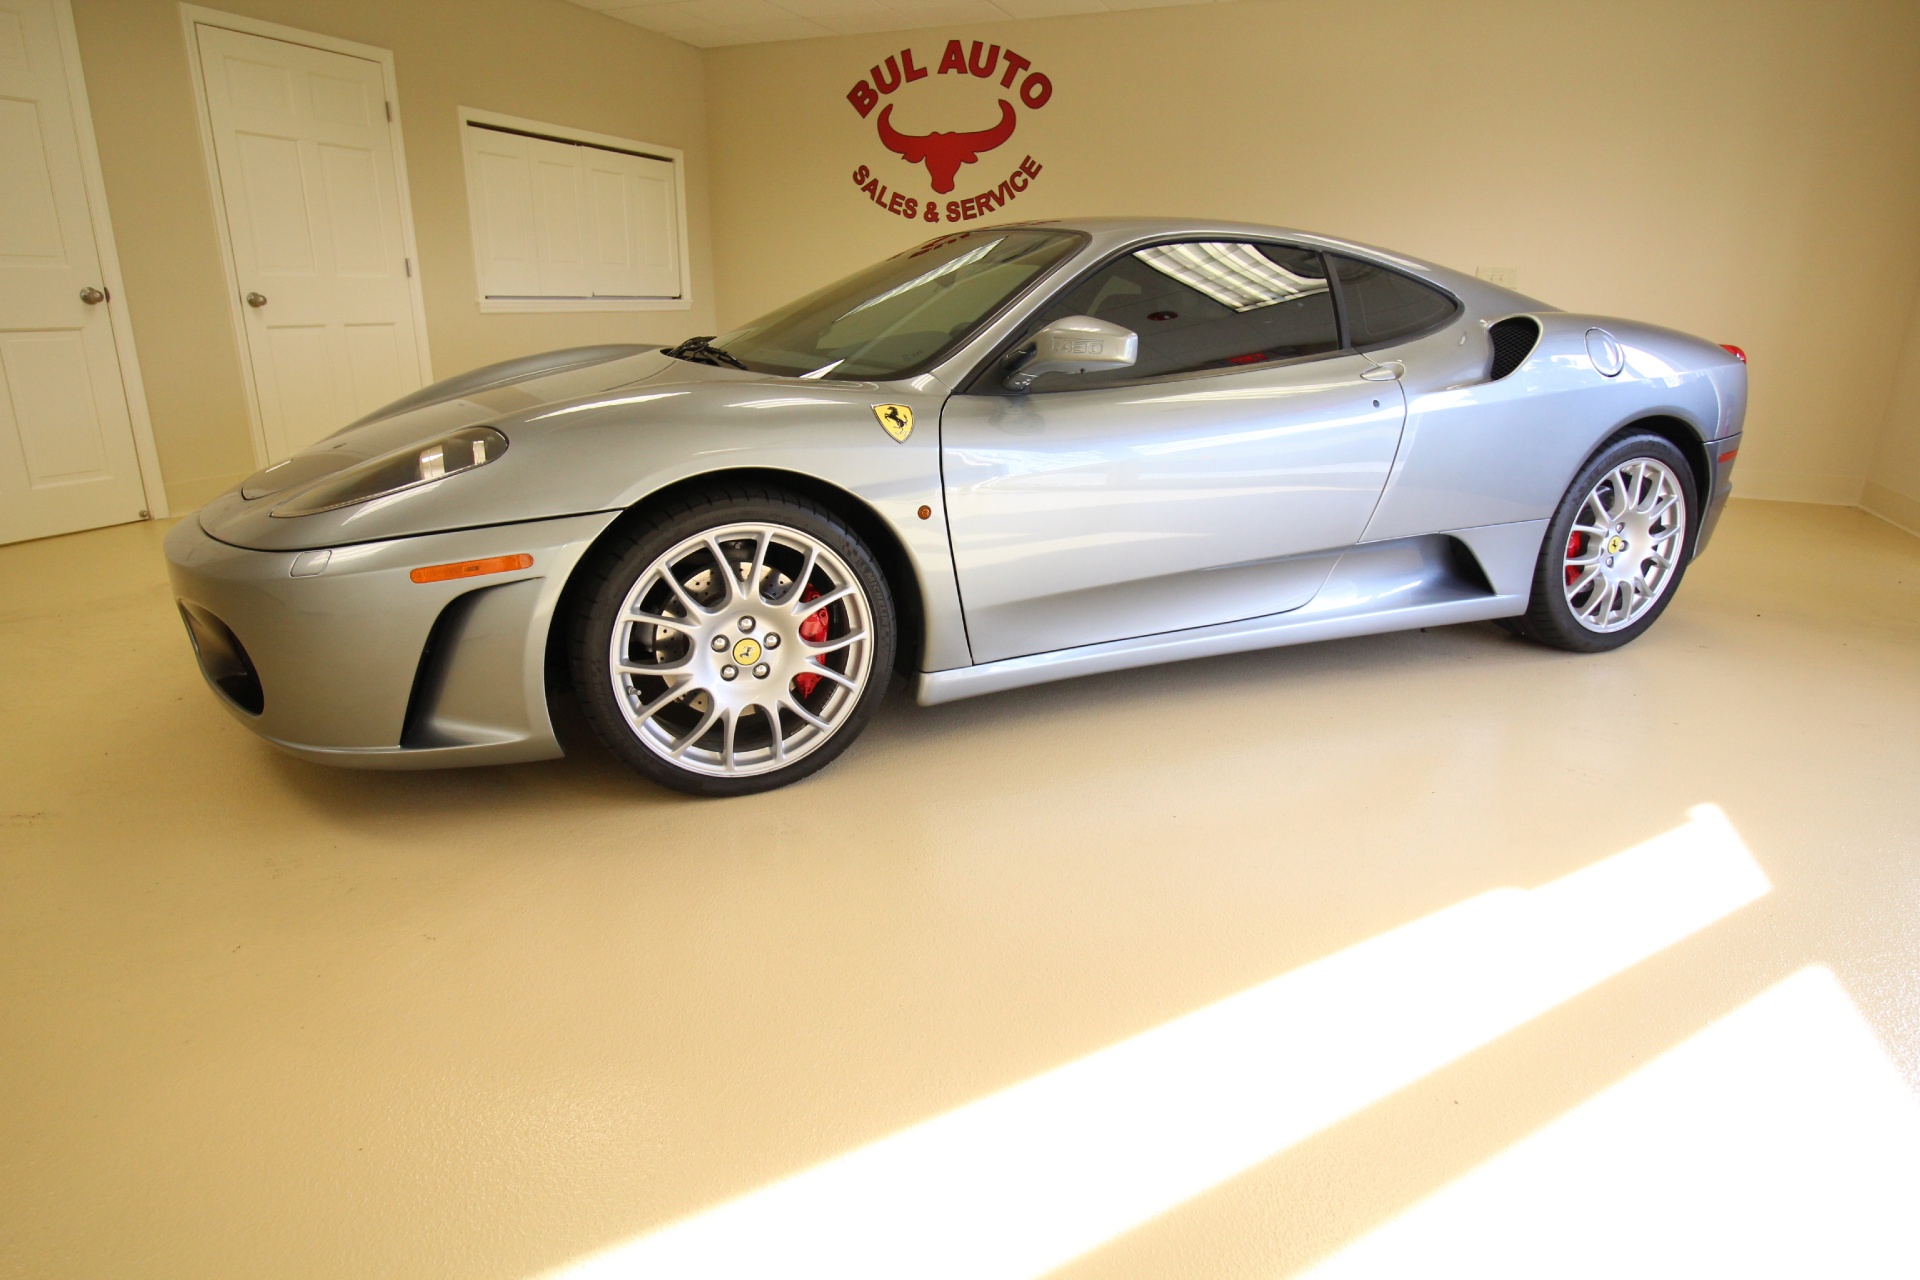 Used 2005 Gray Ferrari F430 COUPE,SUPERB CONDITION,SHIELDS,RED CALIPERS,CHALLENGE RIMS | Albany, NY